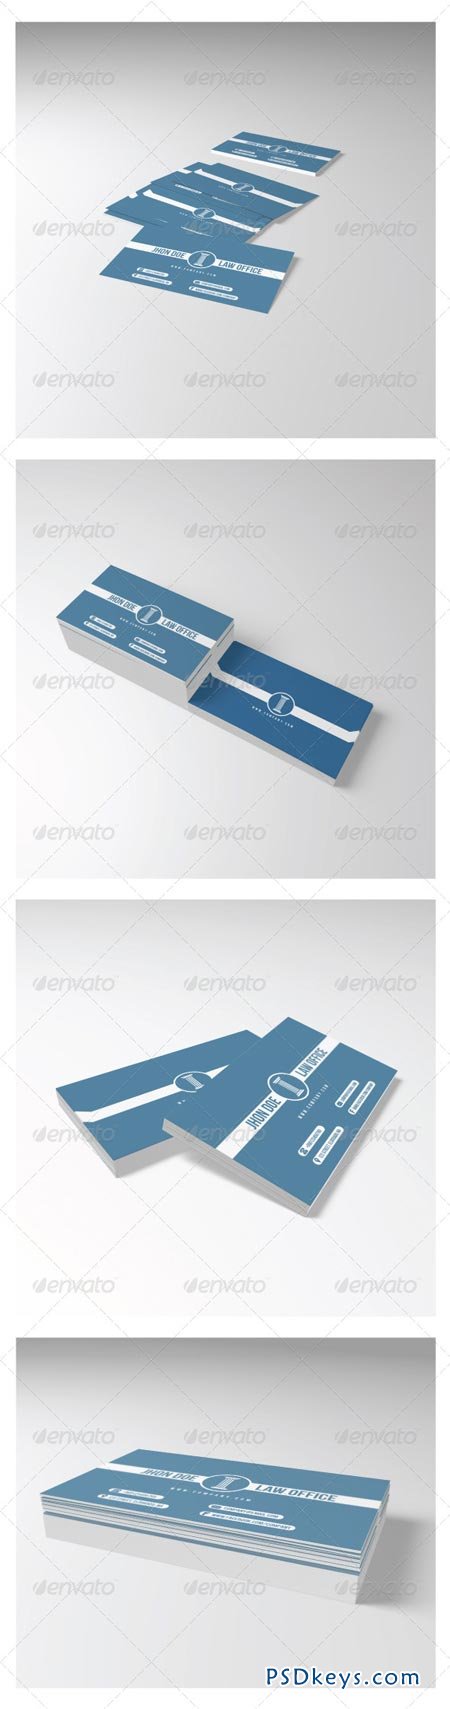 Law Office Business Card 5384177